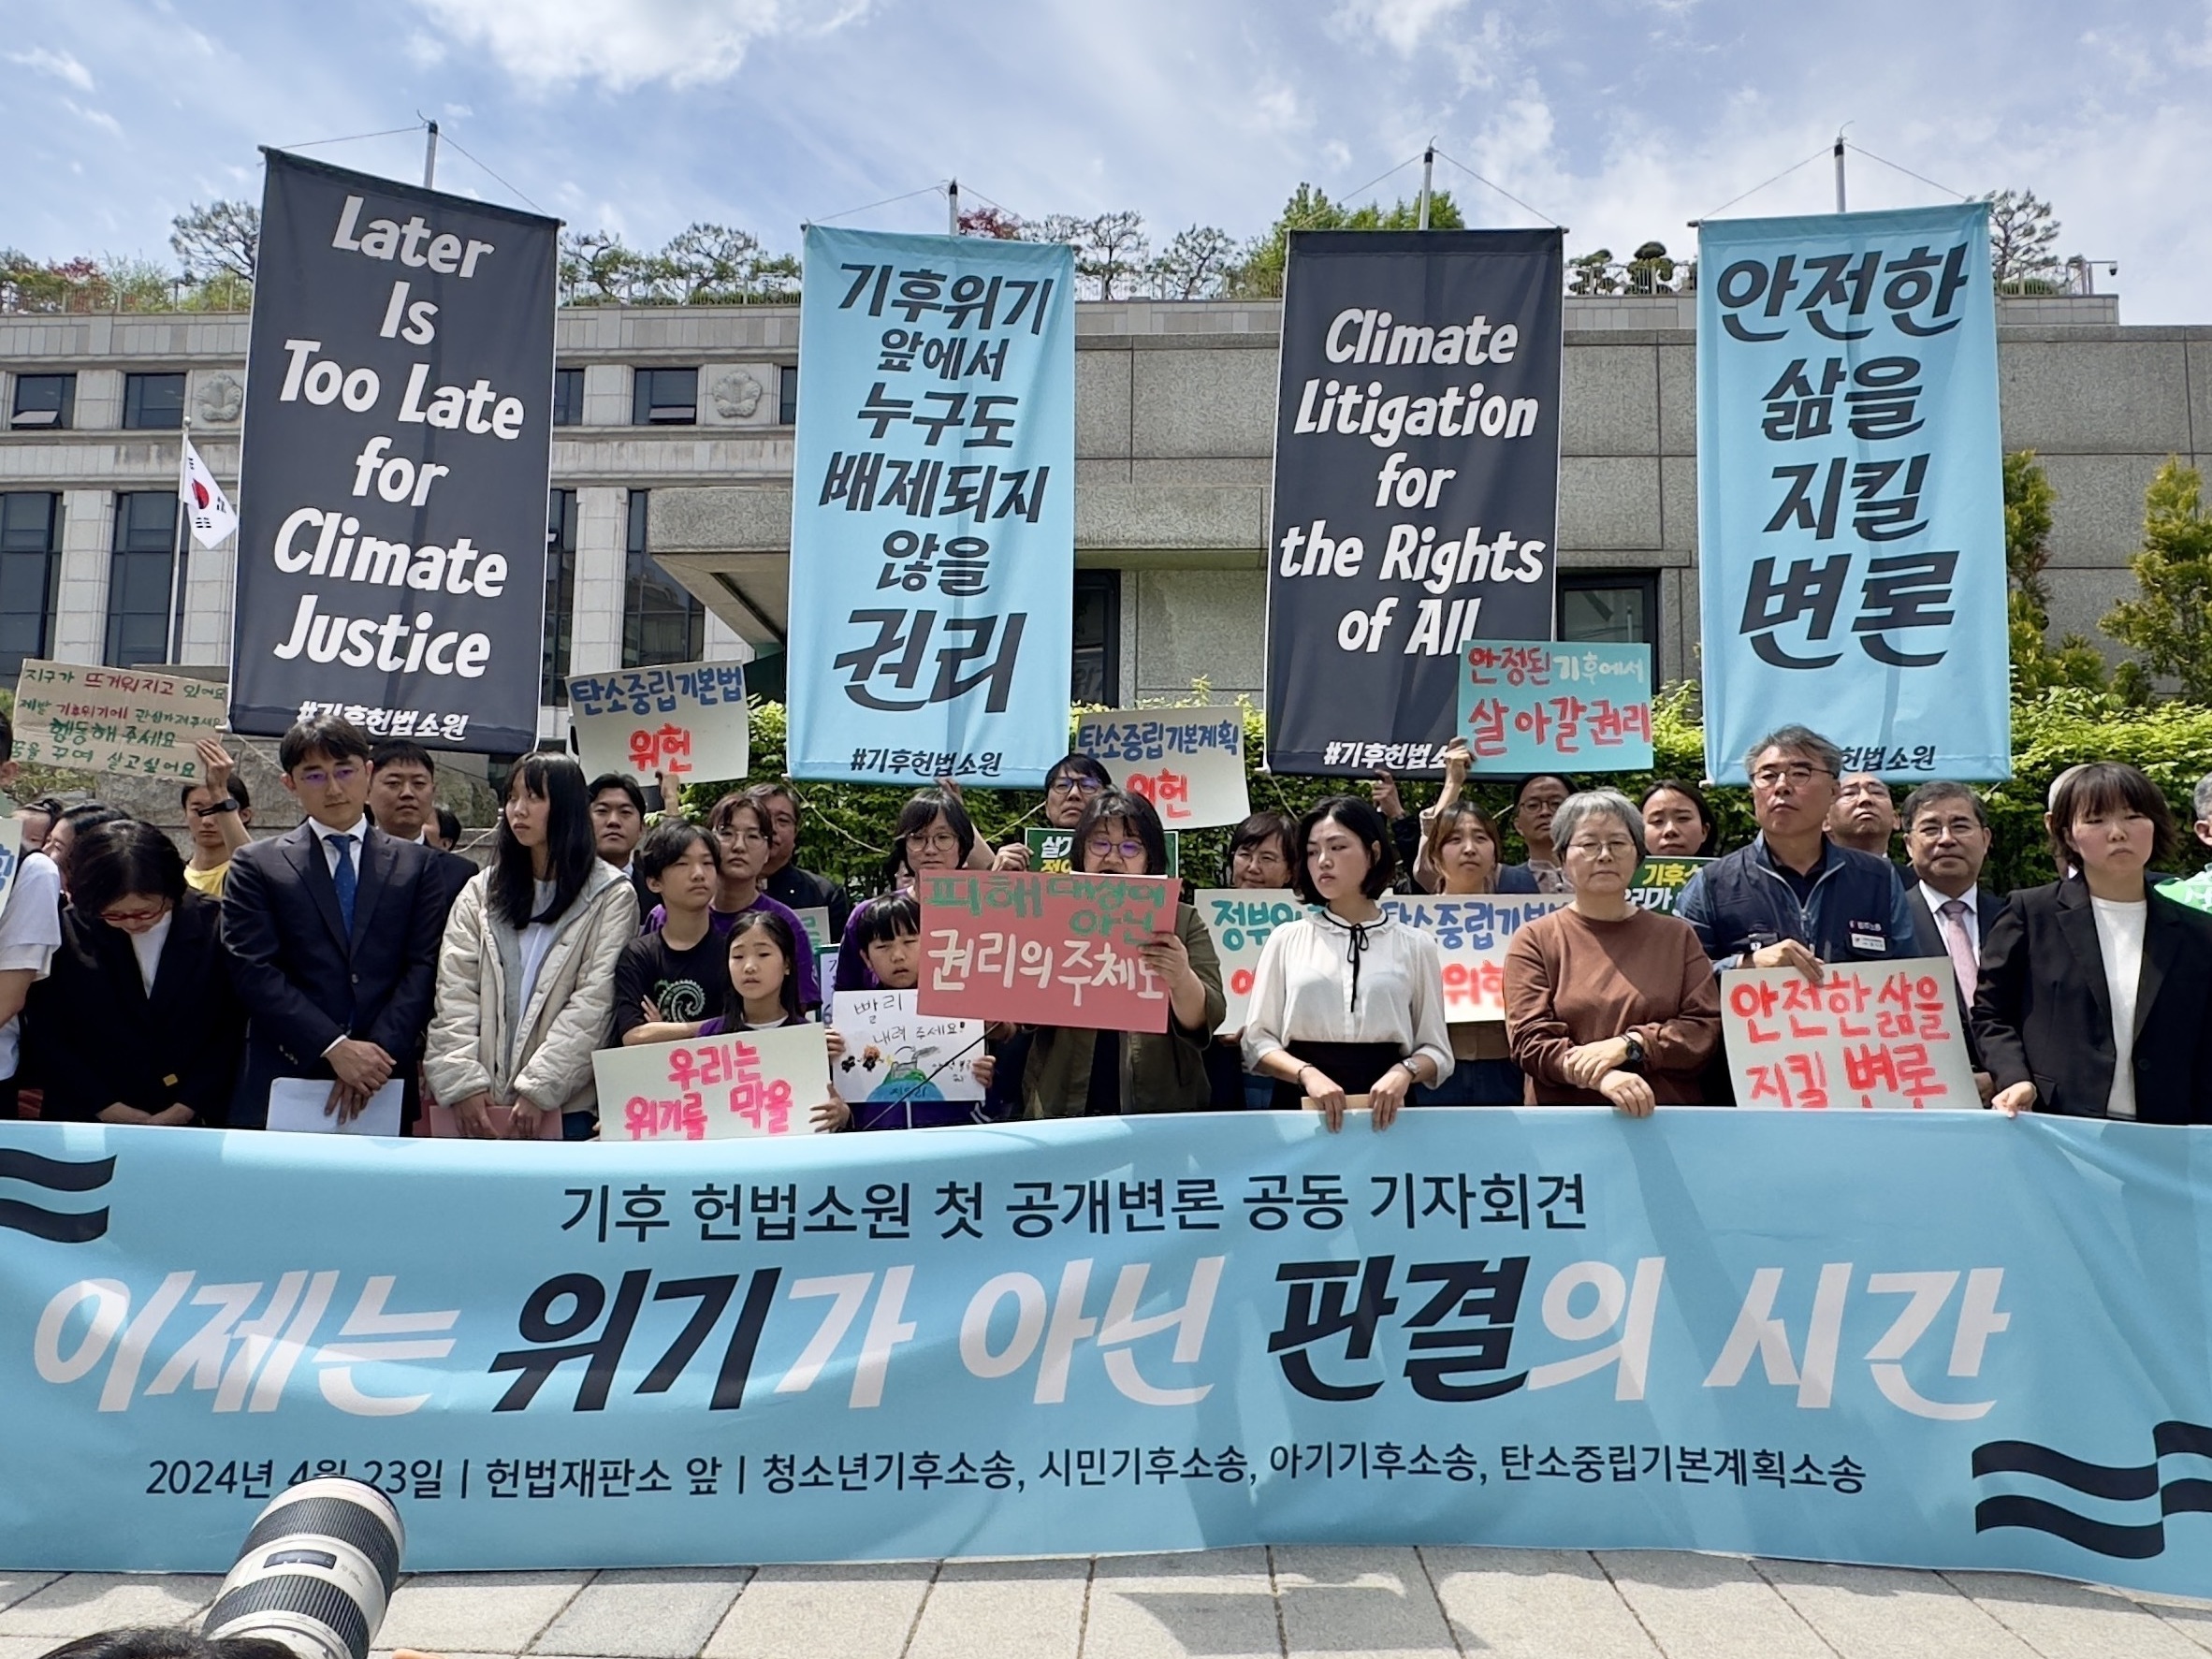 South Koreans sue government over climate change, saying it’s violating human rights